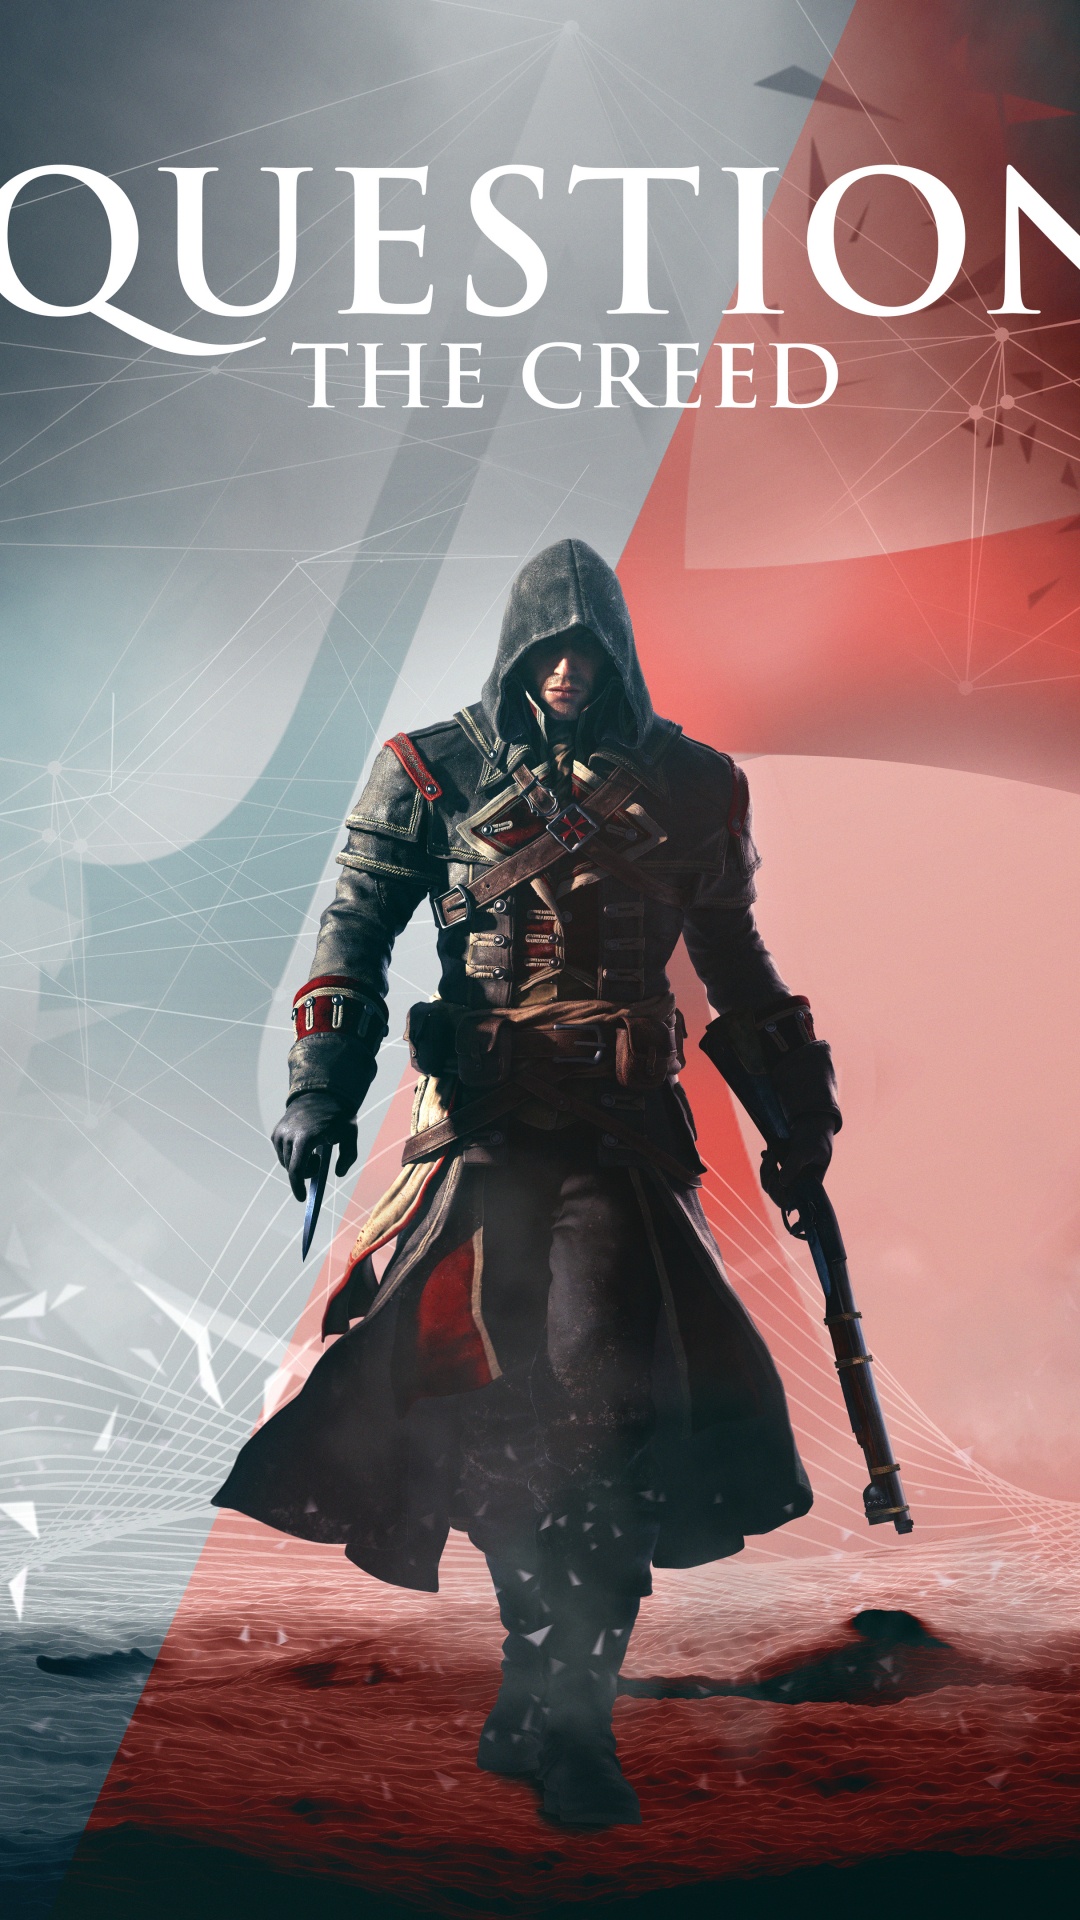 Assassins Creed Rogue, Assassins Creed Unity, Assassins Creed, Assassins Creed Brotherhood, Adventure. Wallpaper in 1080x1920 Resolution